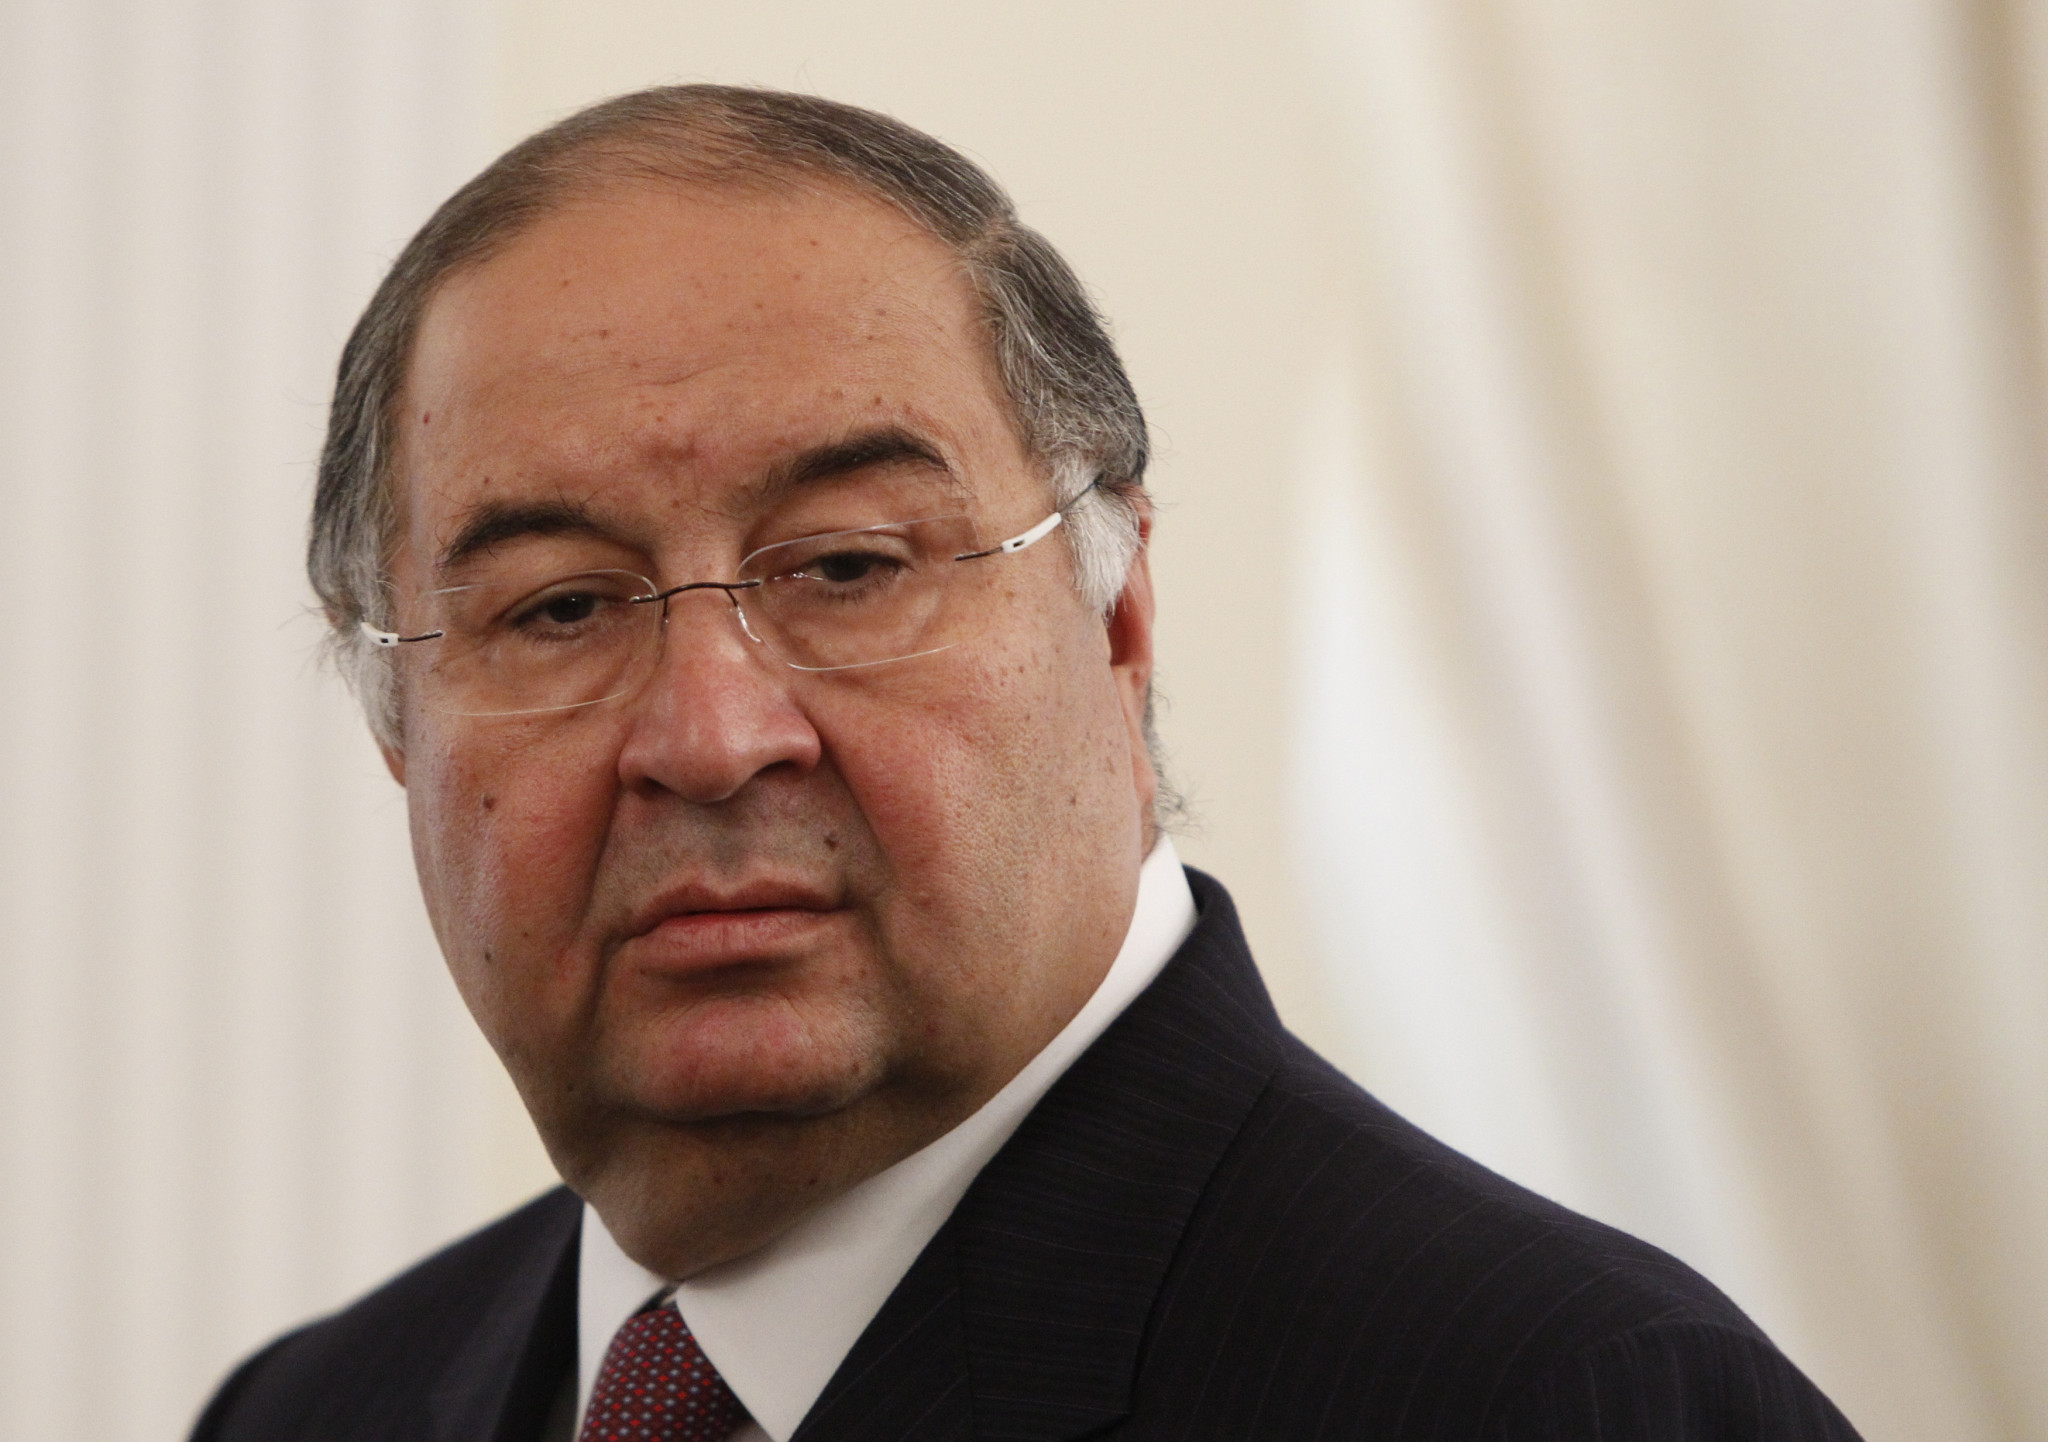 Uzbekistan-born oligarch Alisher Usmanov temporarily stood down as FIE President in March after being placed on the EU sanctions list ©Getty Images